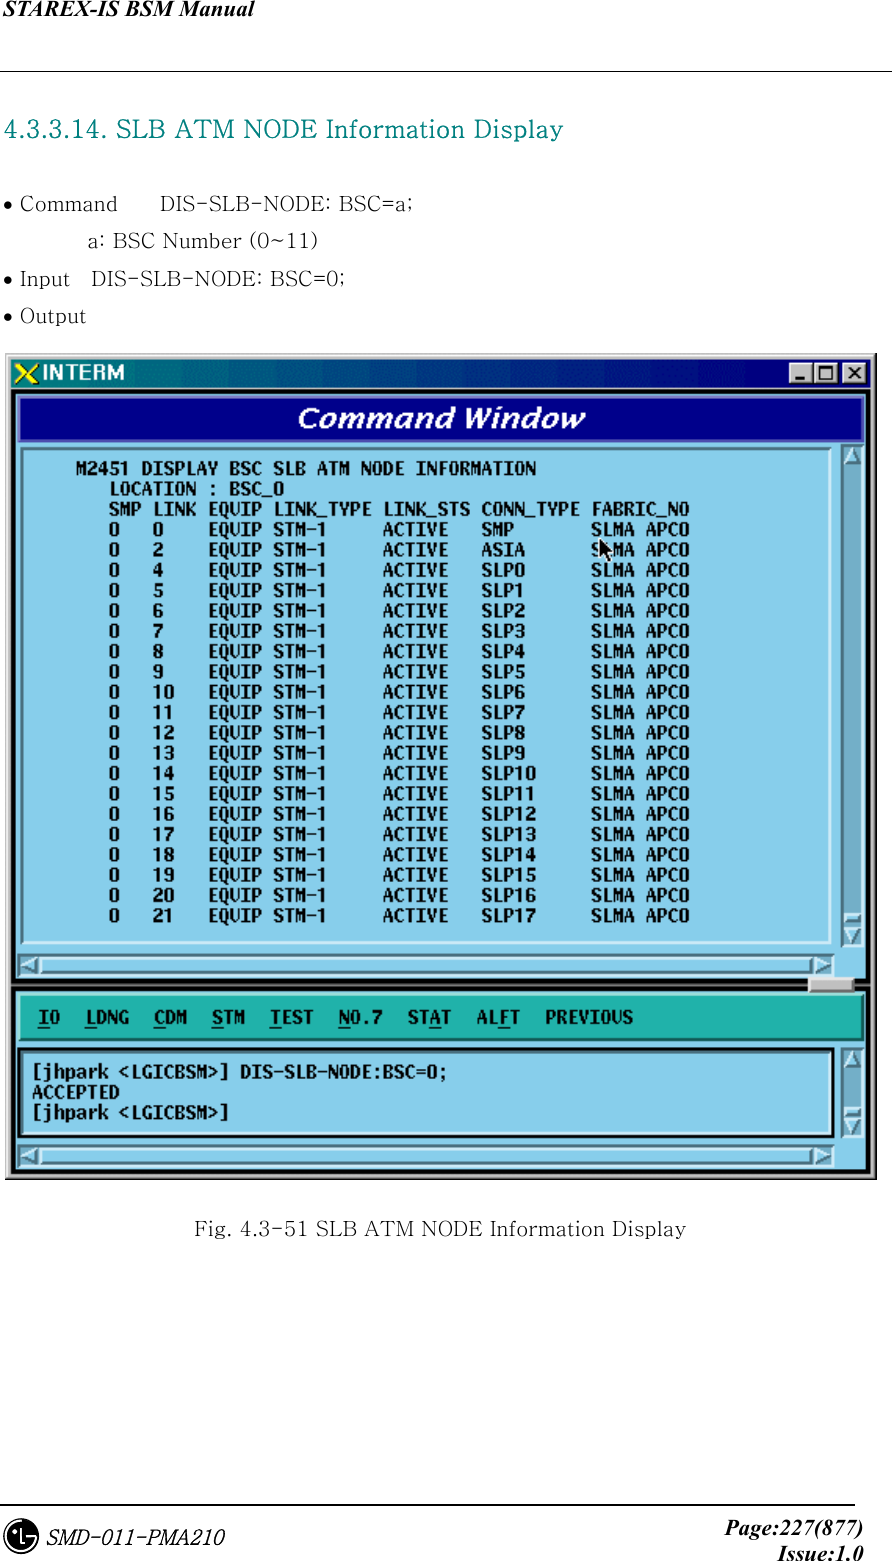 STAREX-IS BSM Manual     Page:227(877)Issue:1.0SMD-011-PMA210  4.3.3.14. SLB ATM NODE Information Display  • Command    DIS-SLB-NODE: BSC=a;         a: BSC Number (0~11) • Input    DIS-SLB-NODE: BSC=0; • Output  Fig. 4.3-51 SLB ATM NODE Information Display 